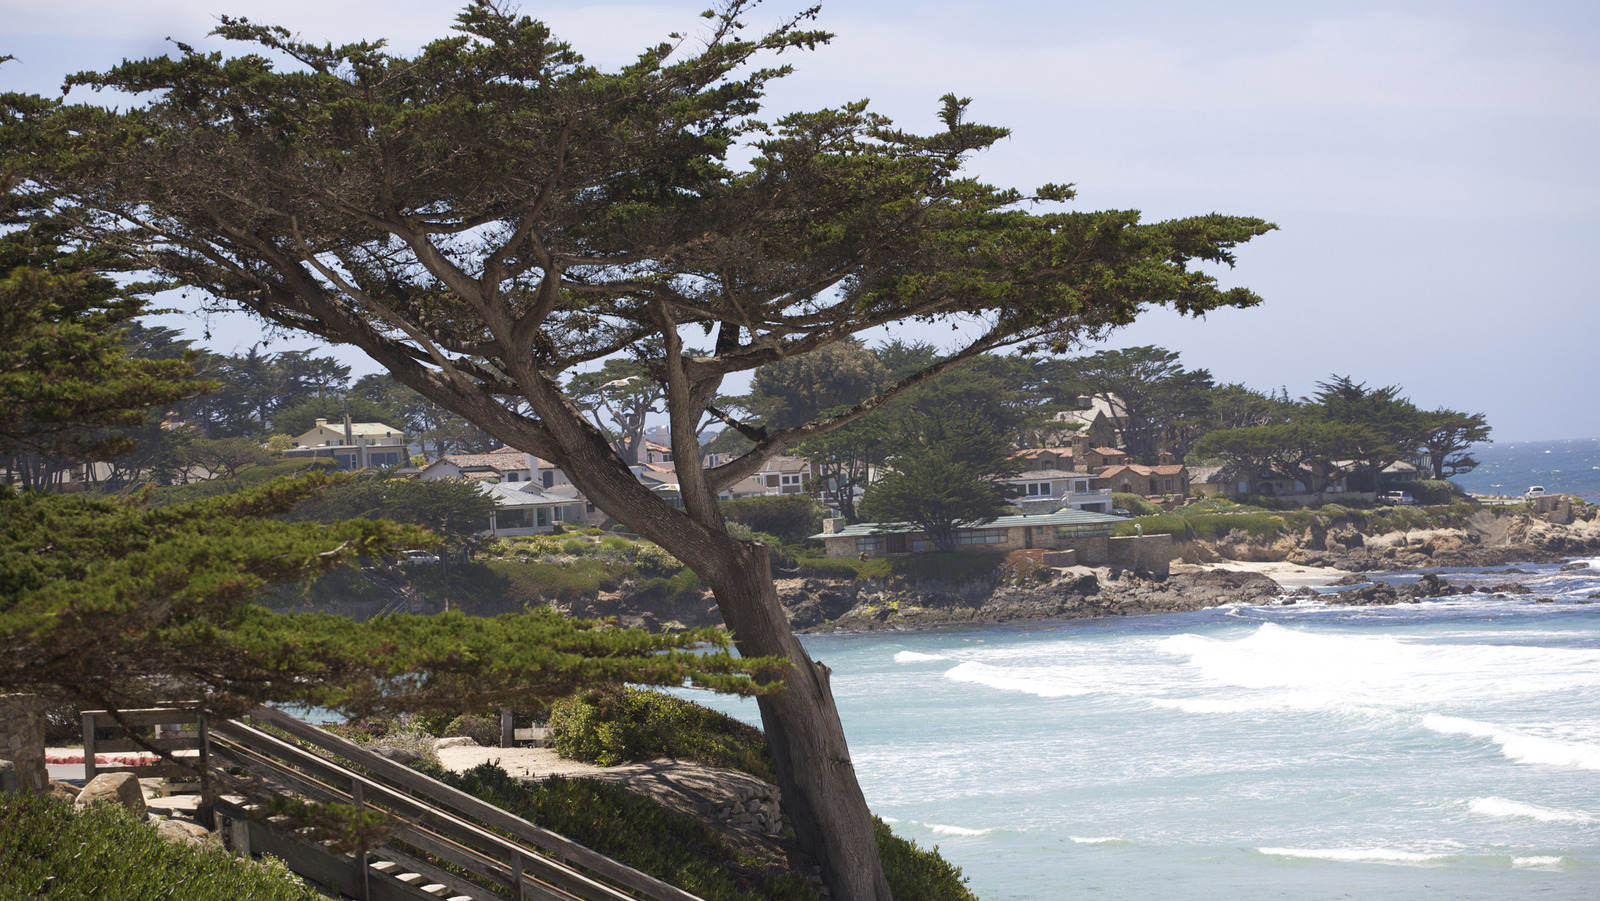 Carmel-By-The-Sea Is The California Town That Feels Like A Fairytale – Explore